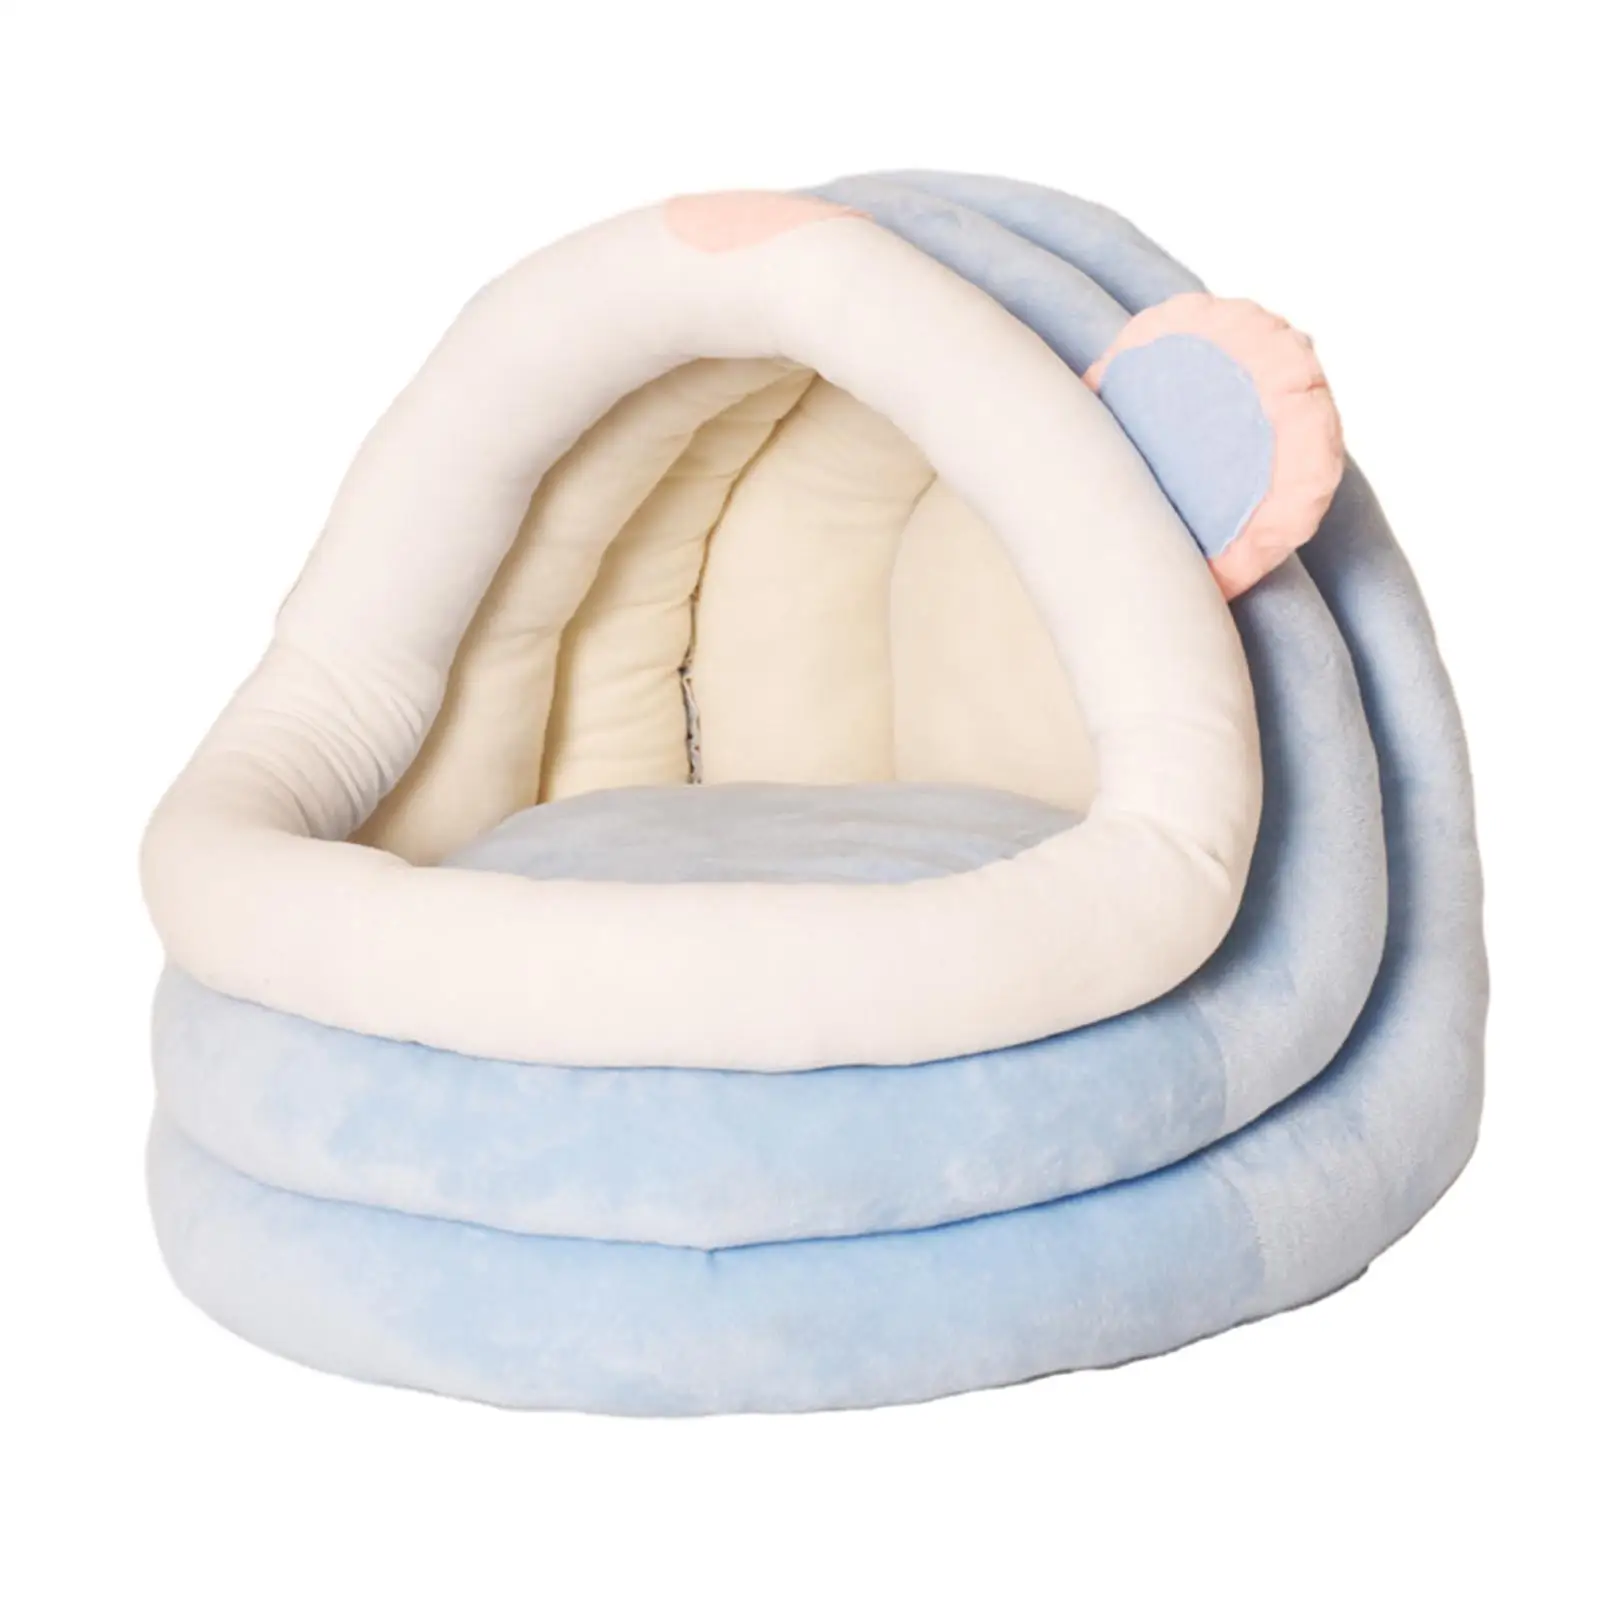 Cute Cat Bed for Indoor Semi Enclosed Soft Plush Washable Cat Nest Dog Cave Puppy Bed for Kitty Cats or Small Dogs Rabbits Puppy